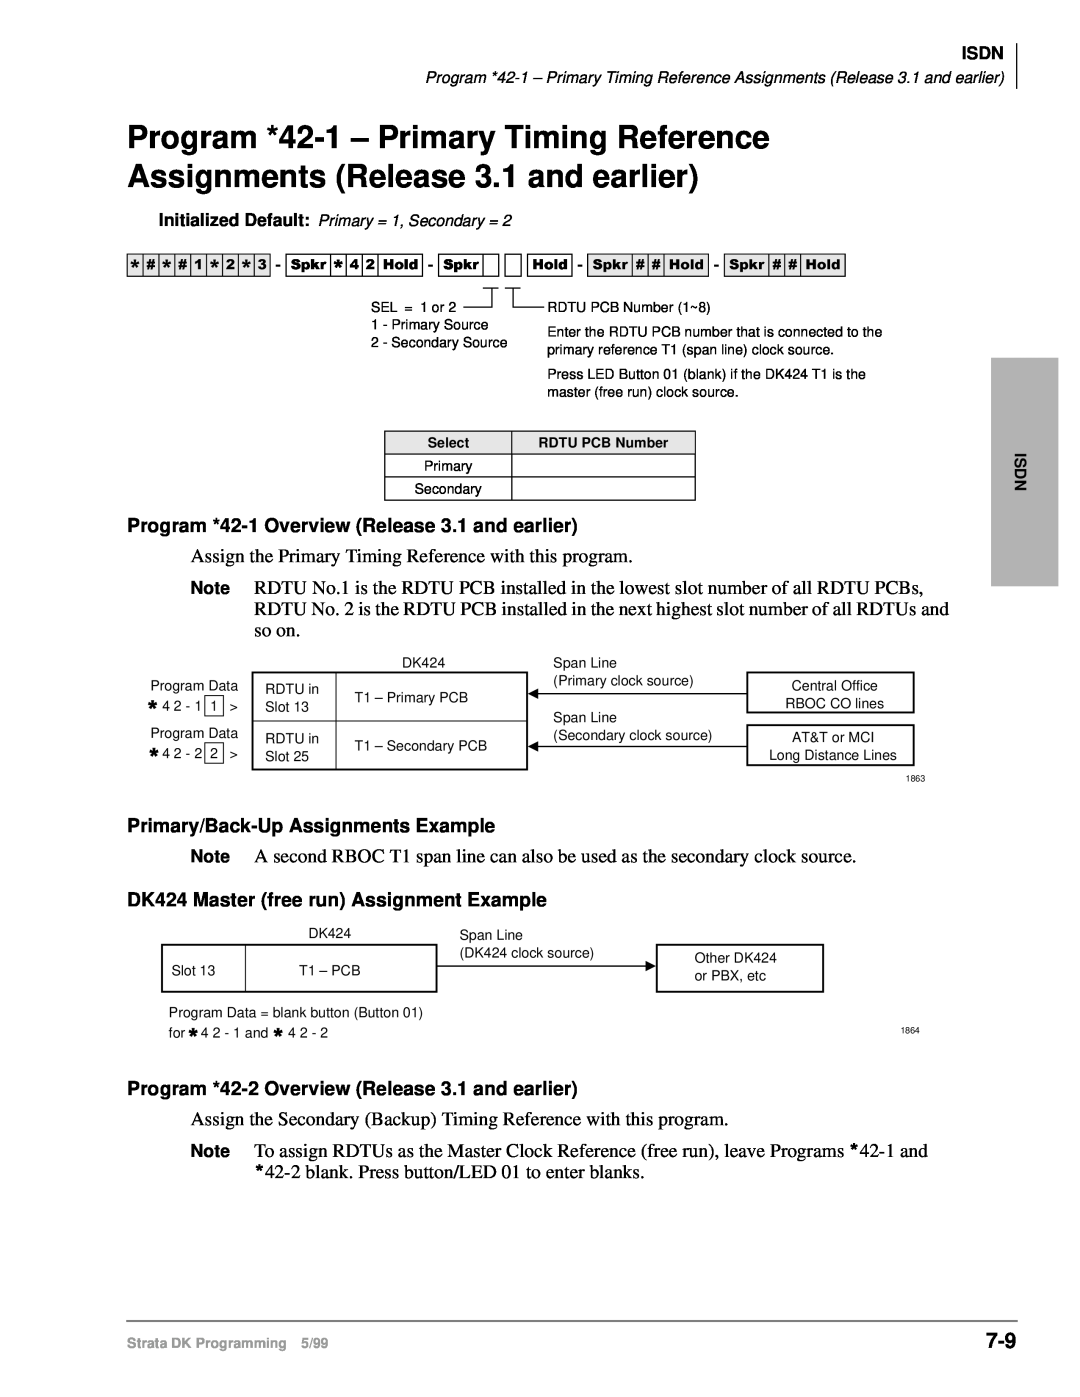 Toshiba dk14 manual Program *42-1Overview Release 3.1 and earlier, Primary/Back-UpAssignments Example 